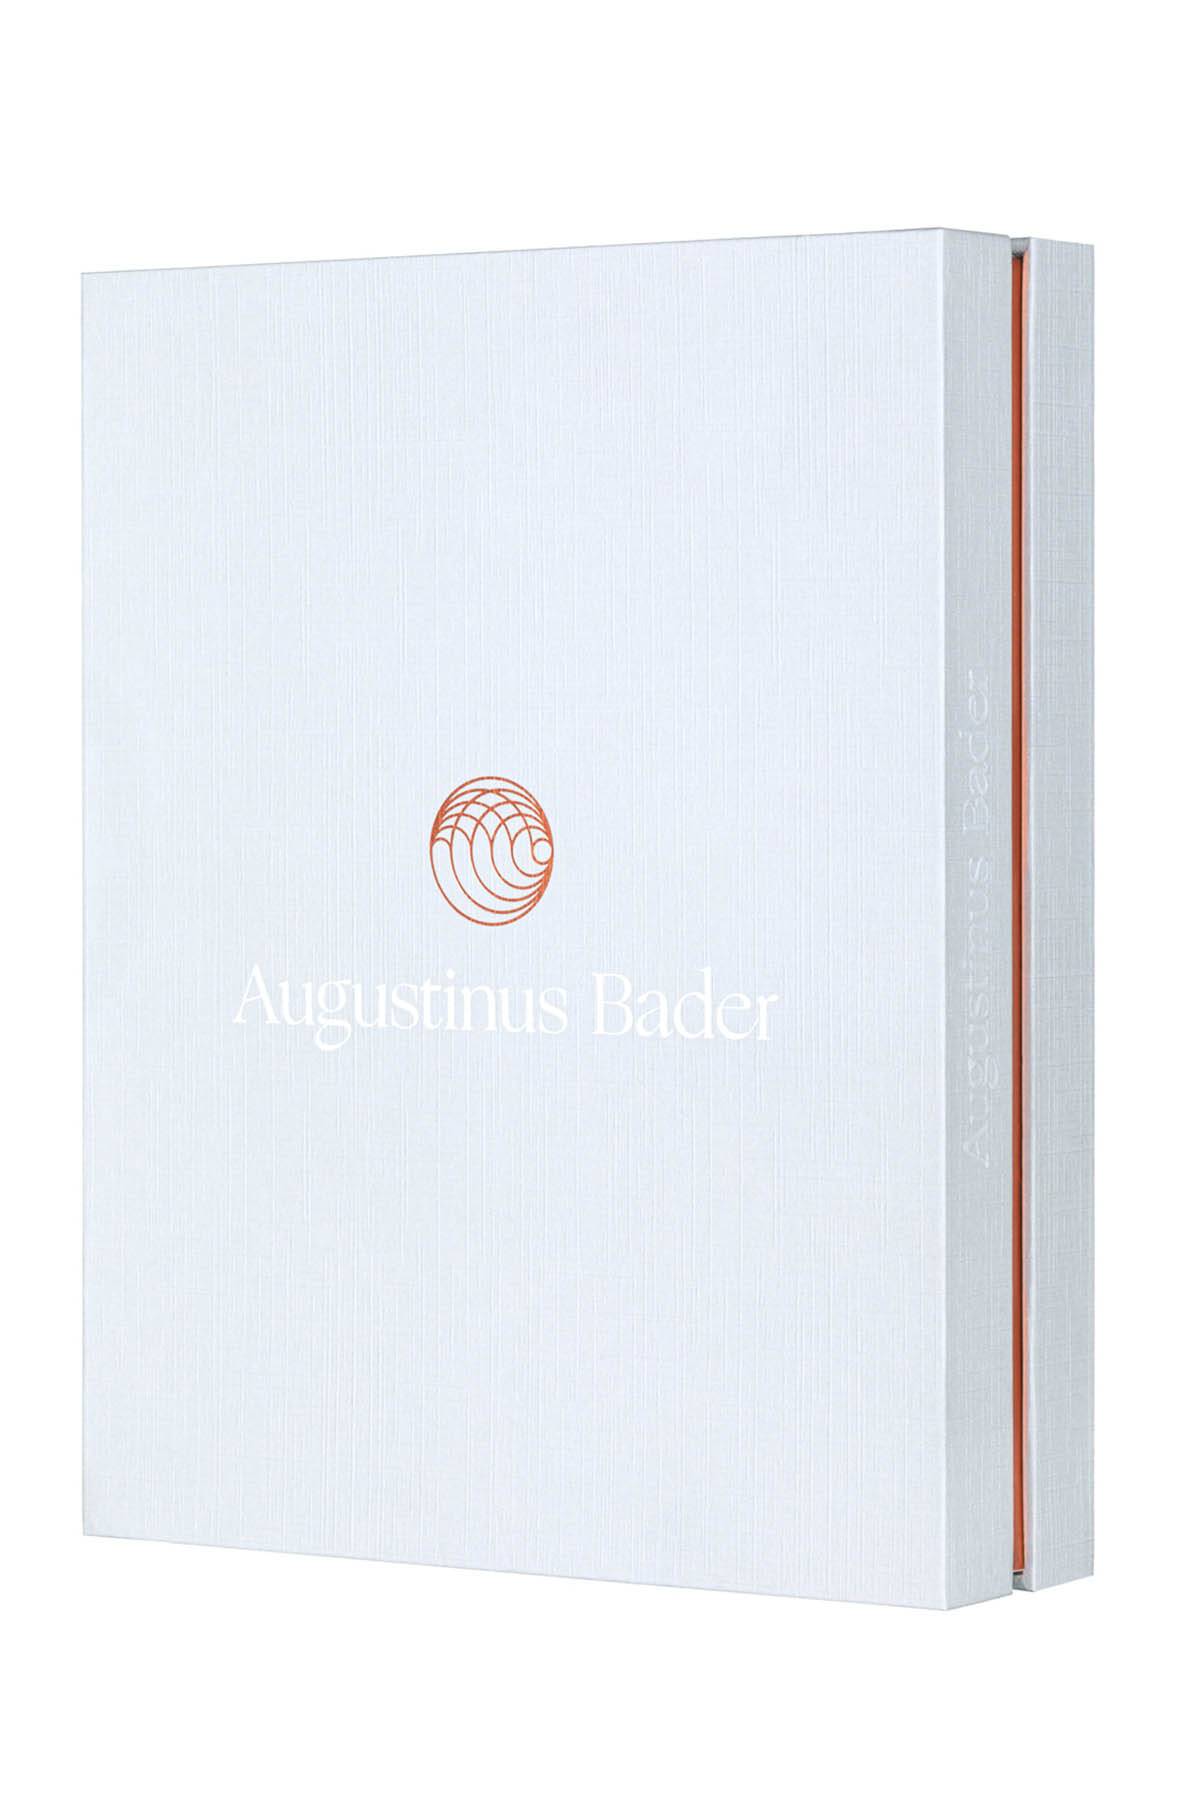 AUGUSTINUS BADER AUGUSTINUS BADER beauty discovery duo - 30ml 30ml